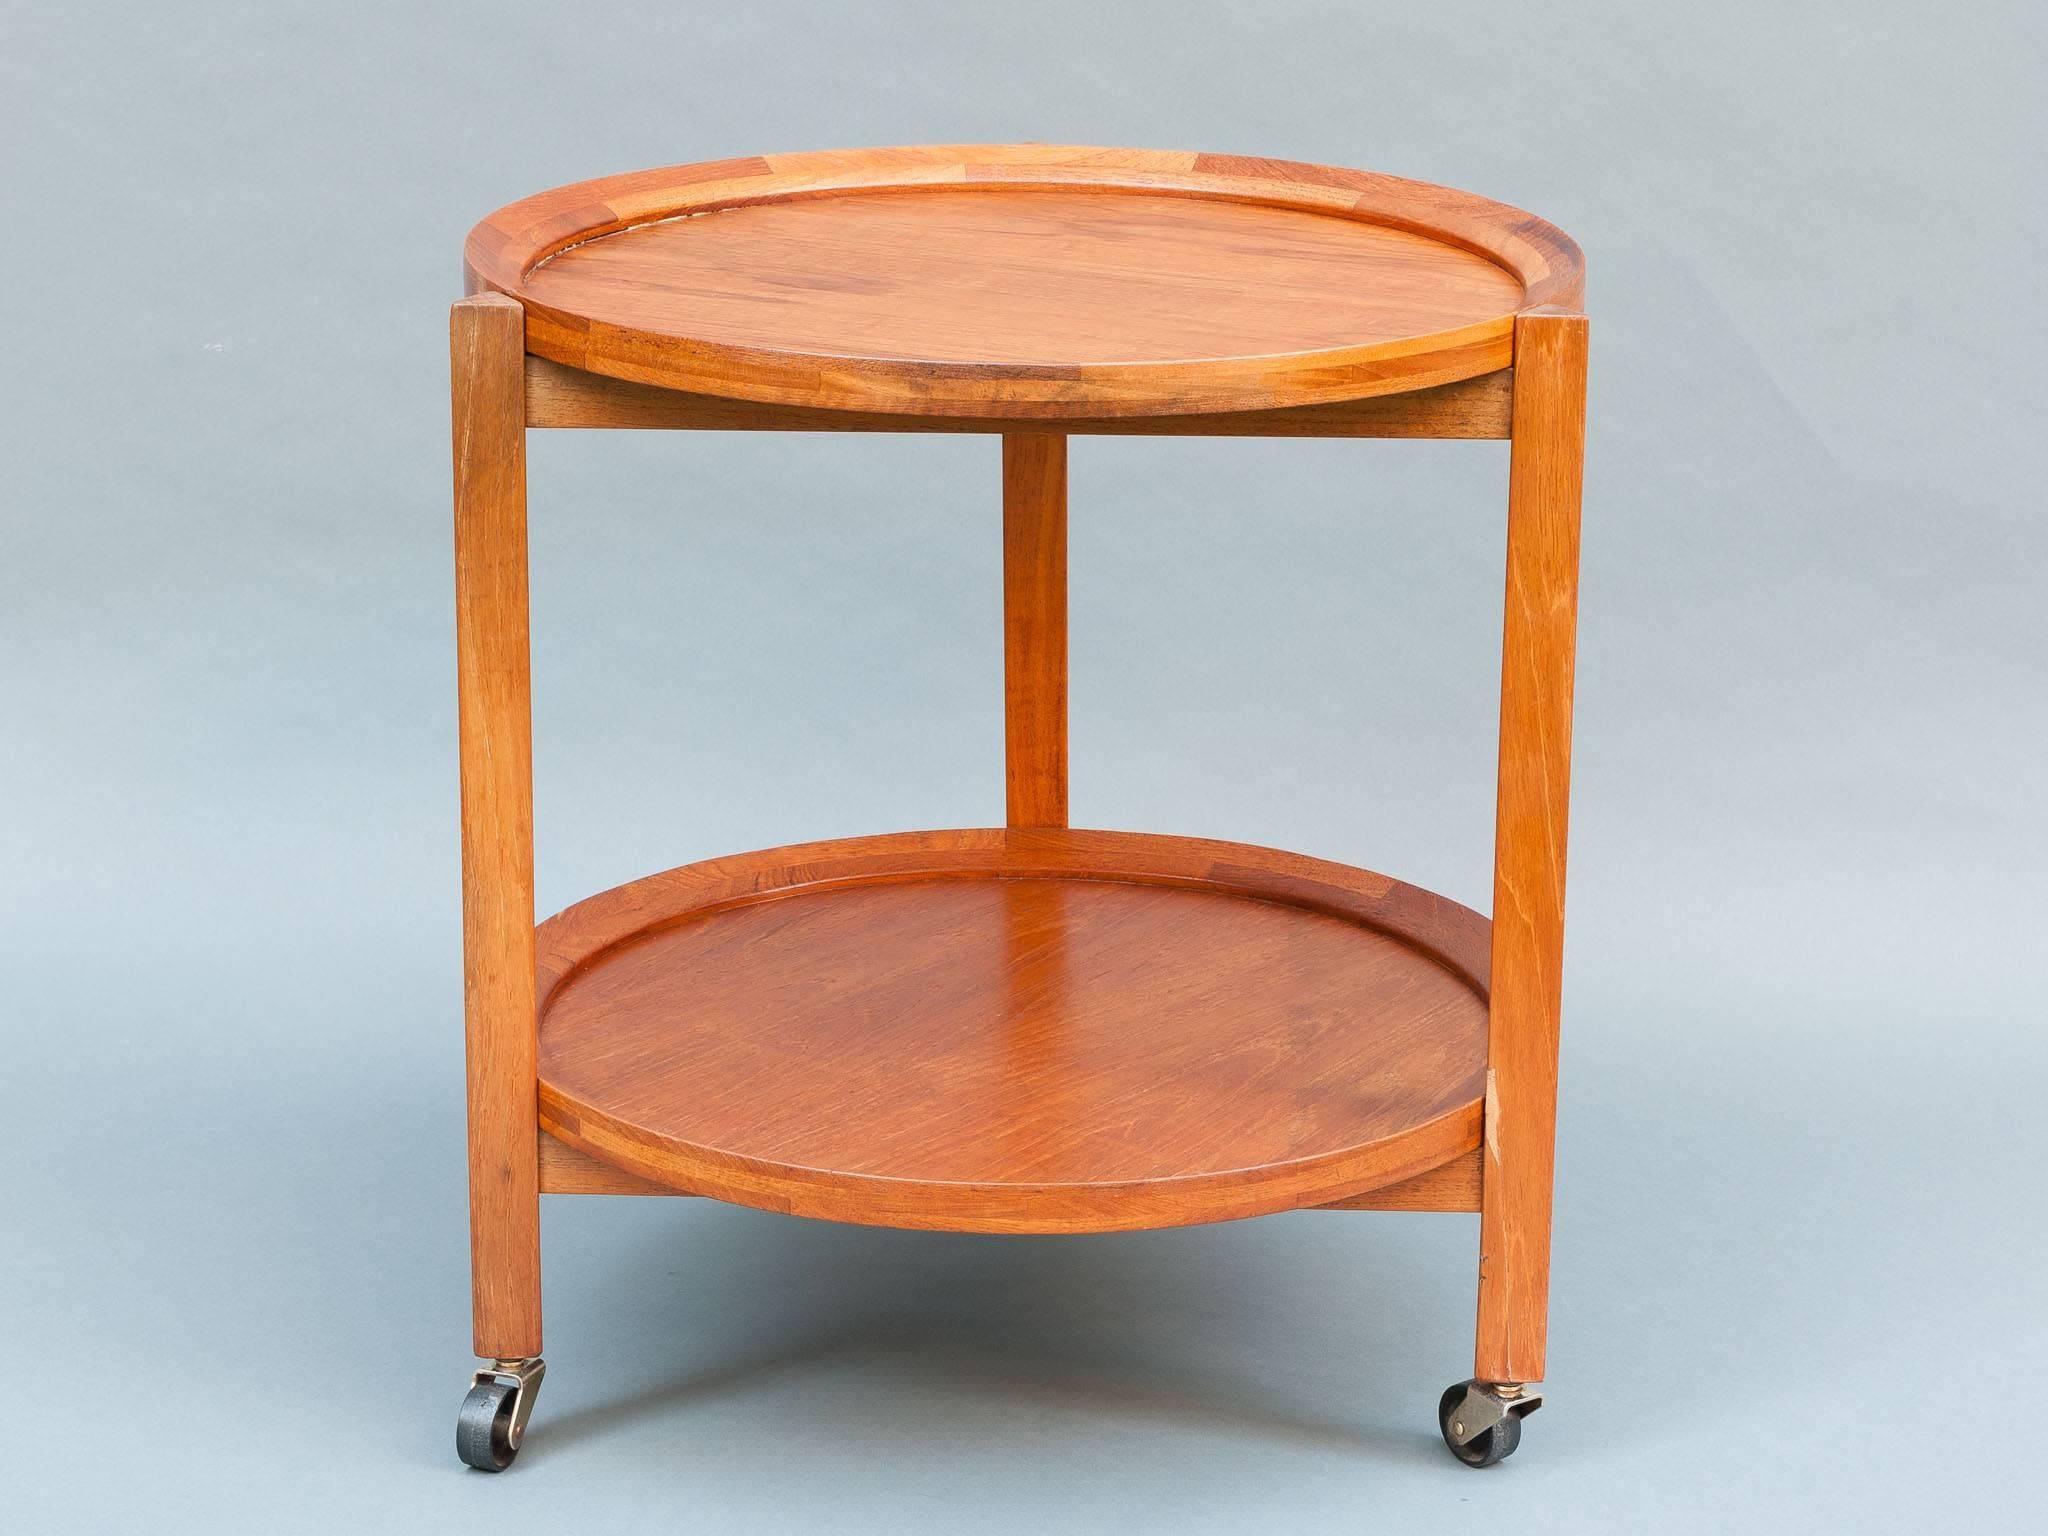 20th Century 1960s Sika Møbler Midcentury Teak Round Serving Trolley Cart Inc. Two Trays 